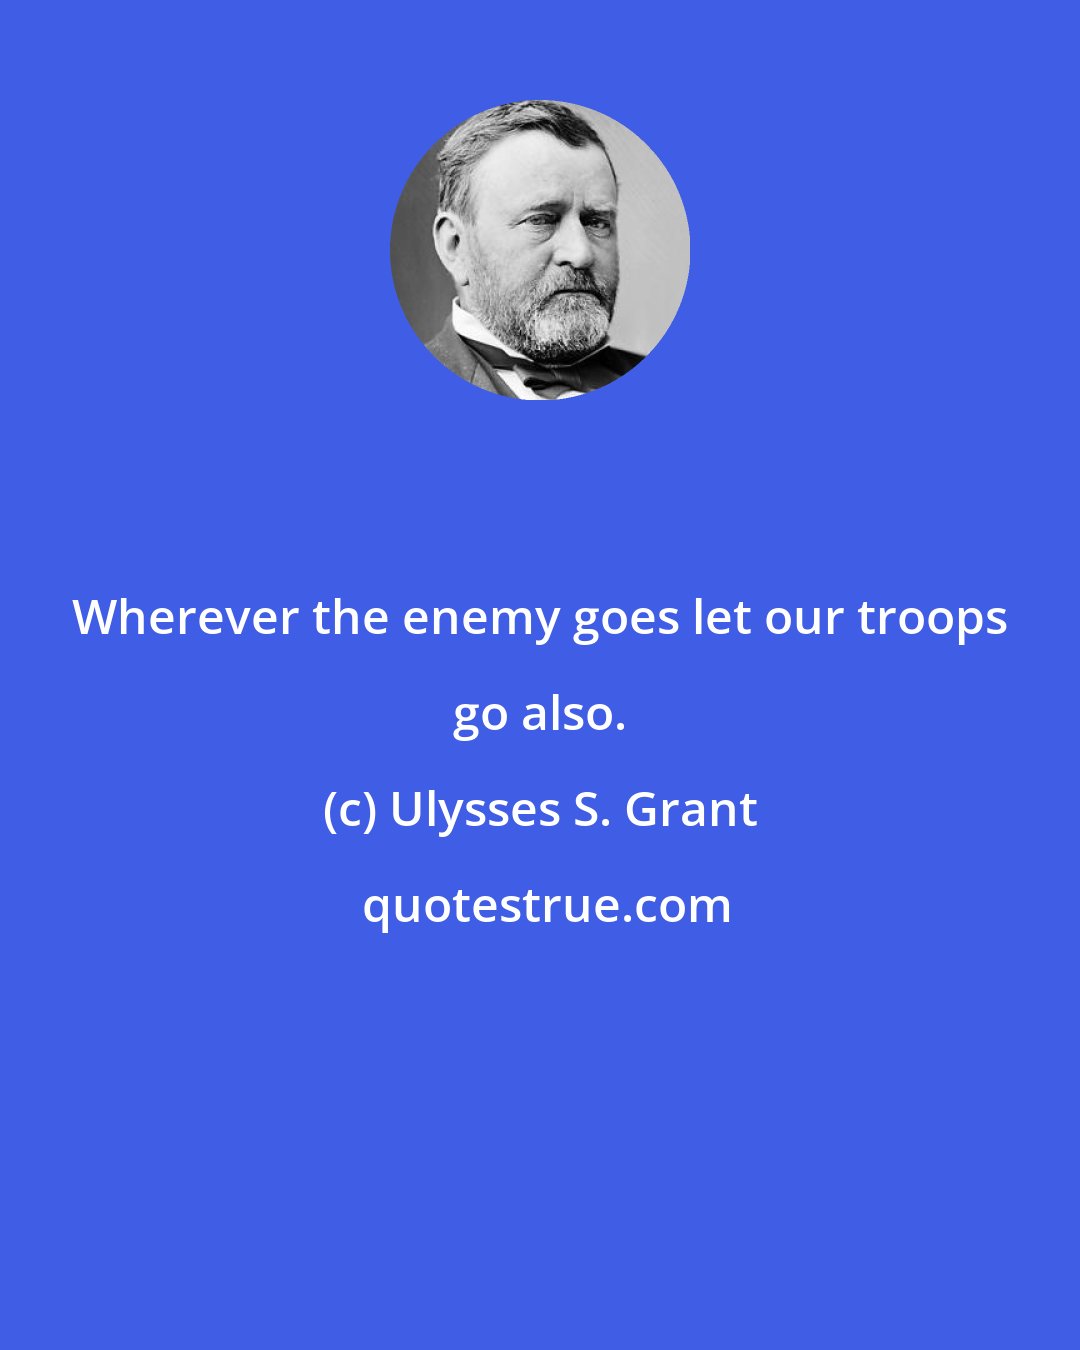 Ulysses S. Grant: Wherever the enemy goes let our troops go also.